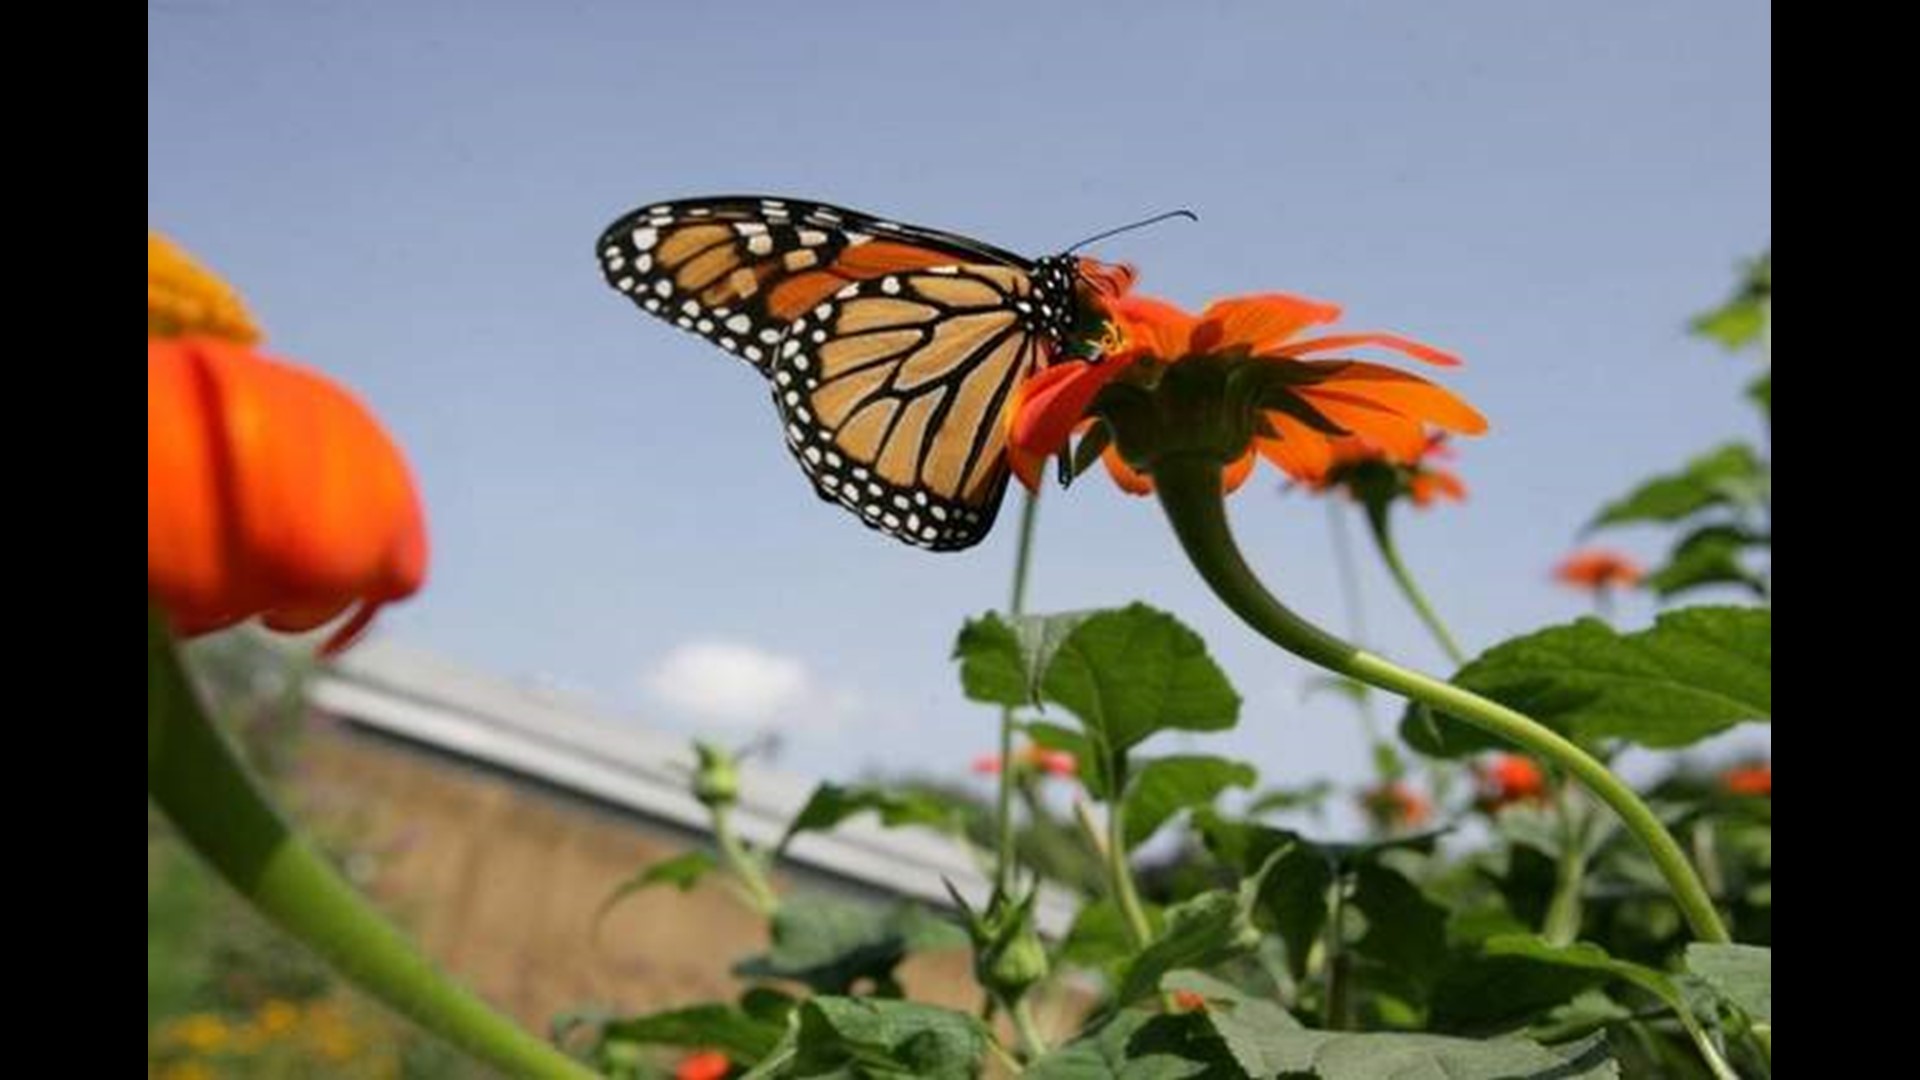 Celebrate monarchs in the fall at John Ball Zoo this weekend, before they take flight for their migration south to Mexico for the winter. Monarch releases will occur on the hour from 10 a.m. to 3 p.m. on August 24.